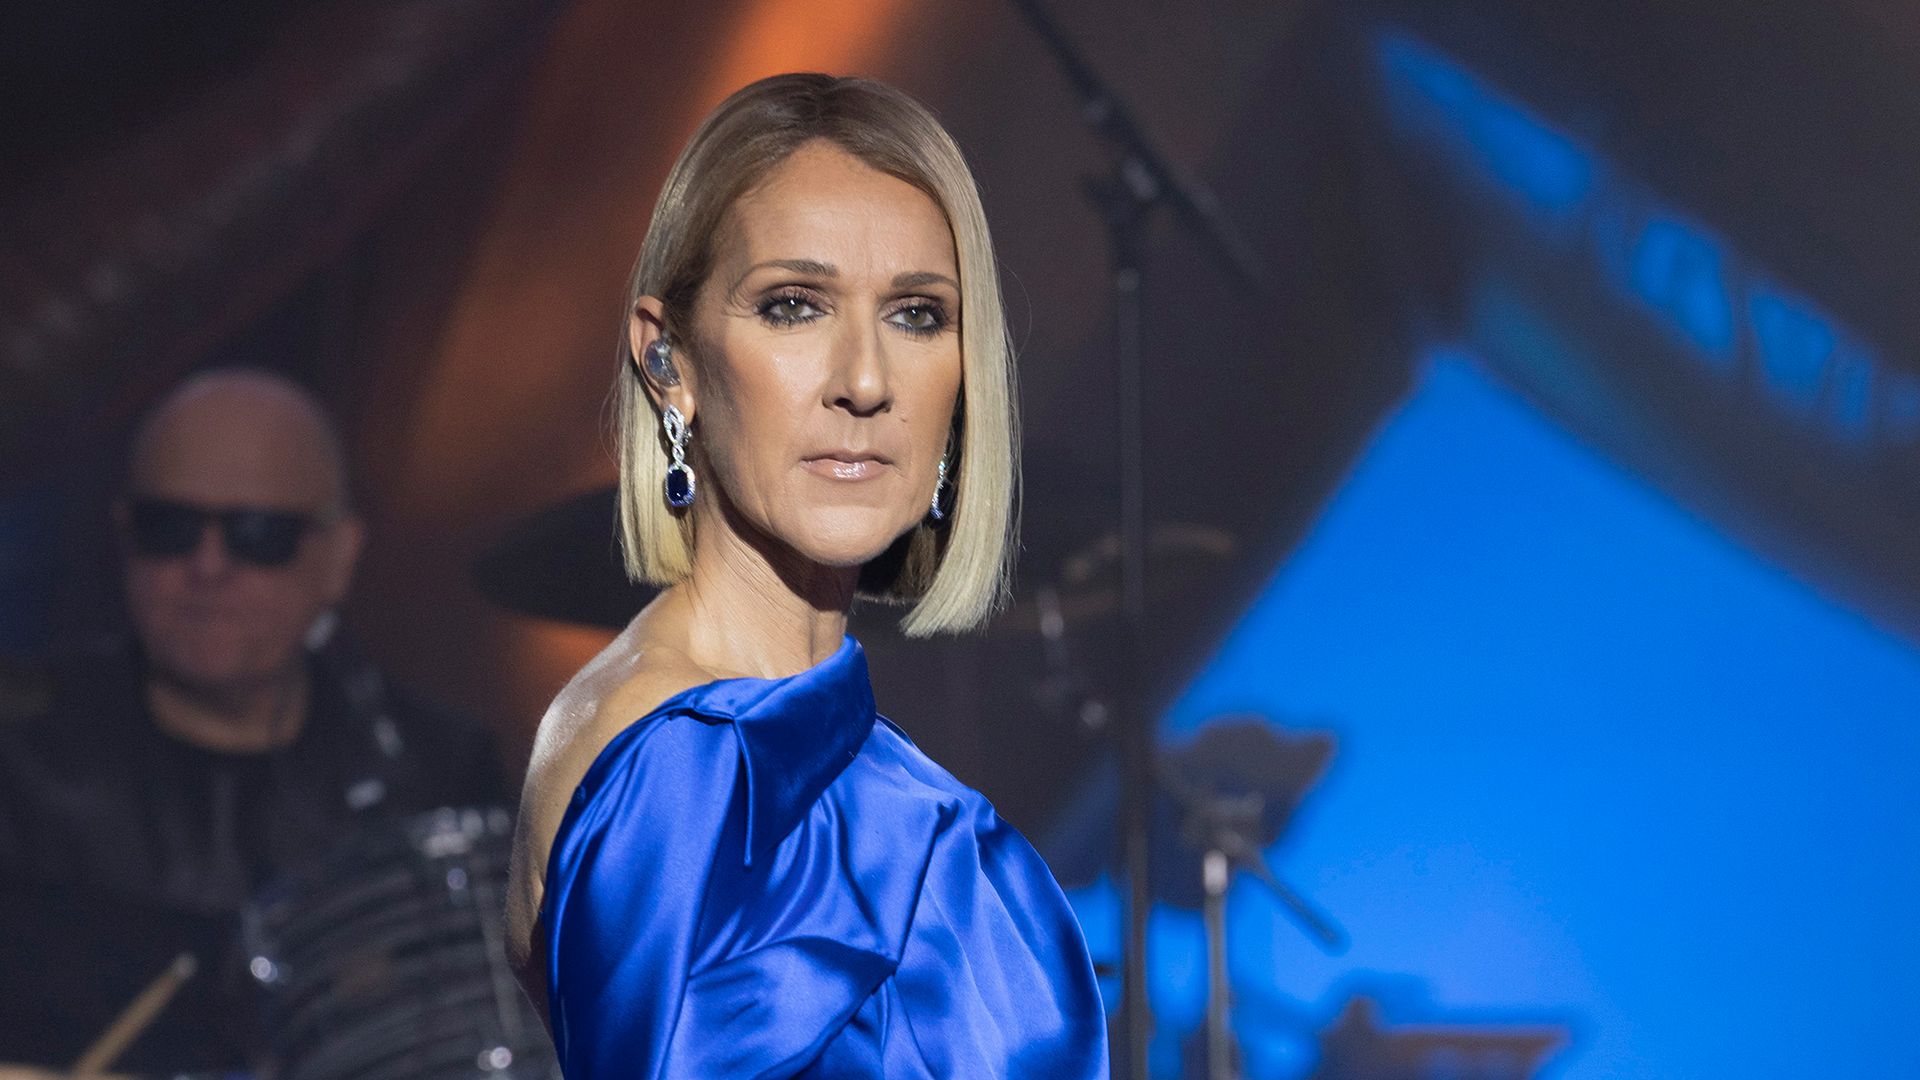 Celine Dion performing at the Macys Thanksgiving Parade in 2019